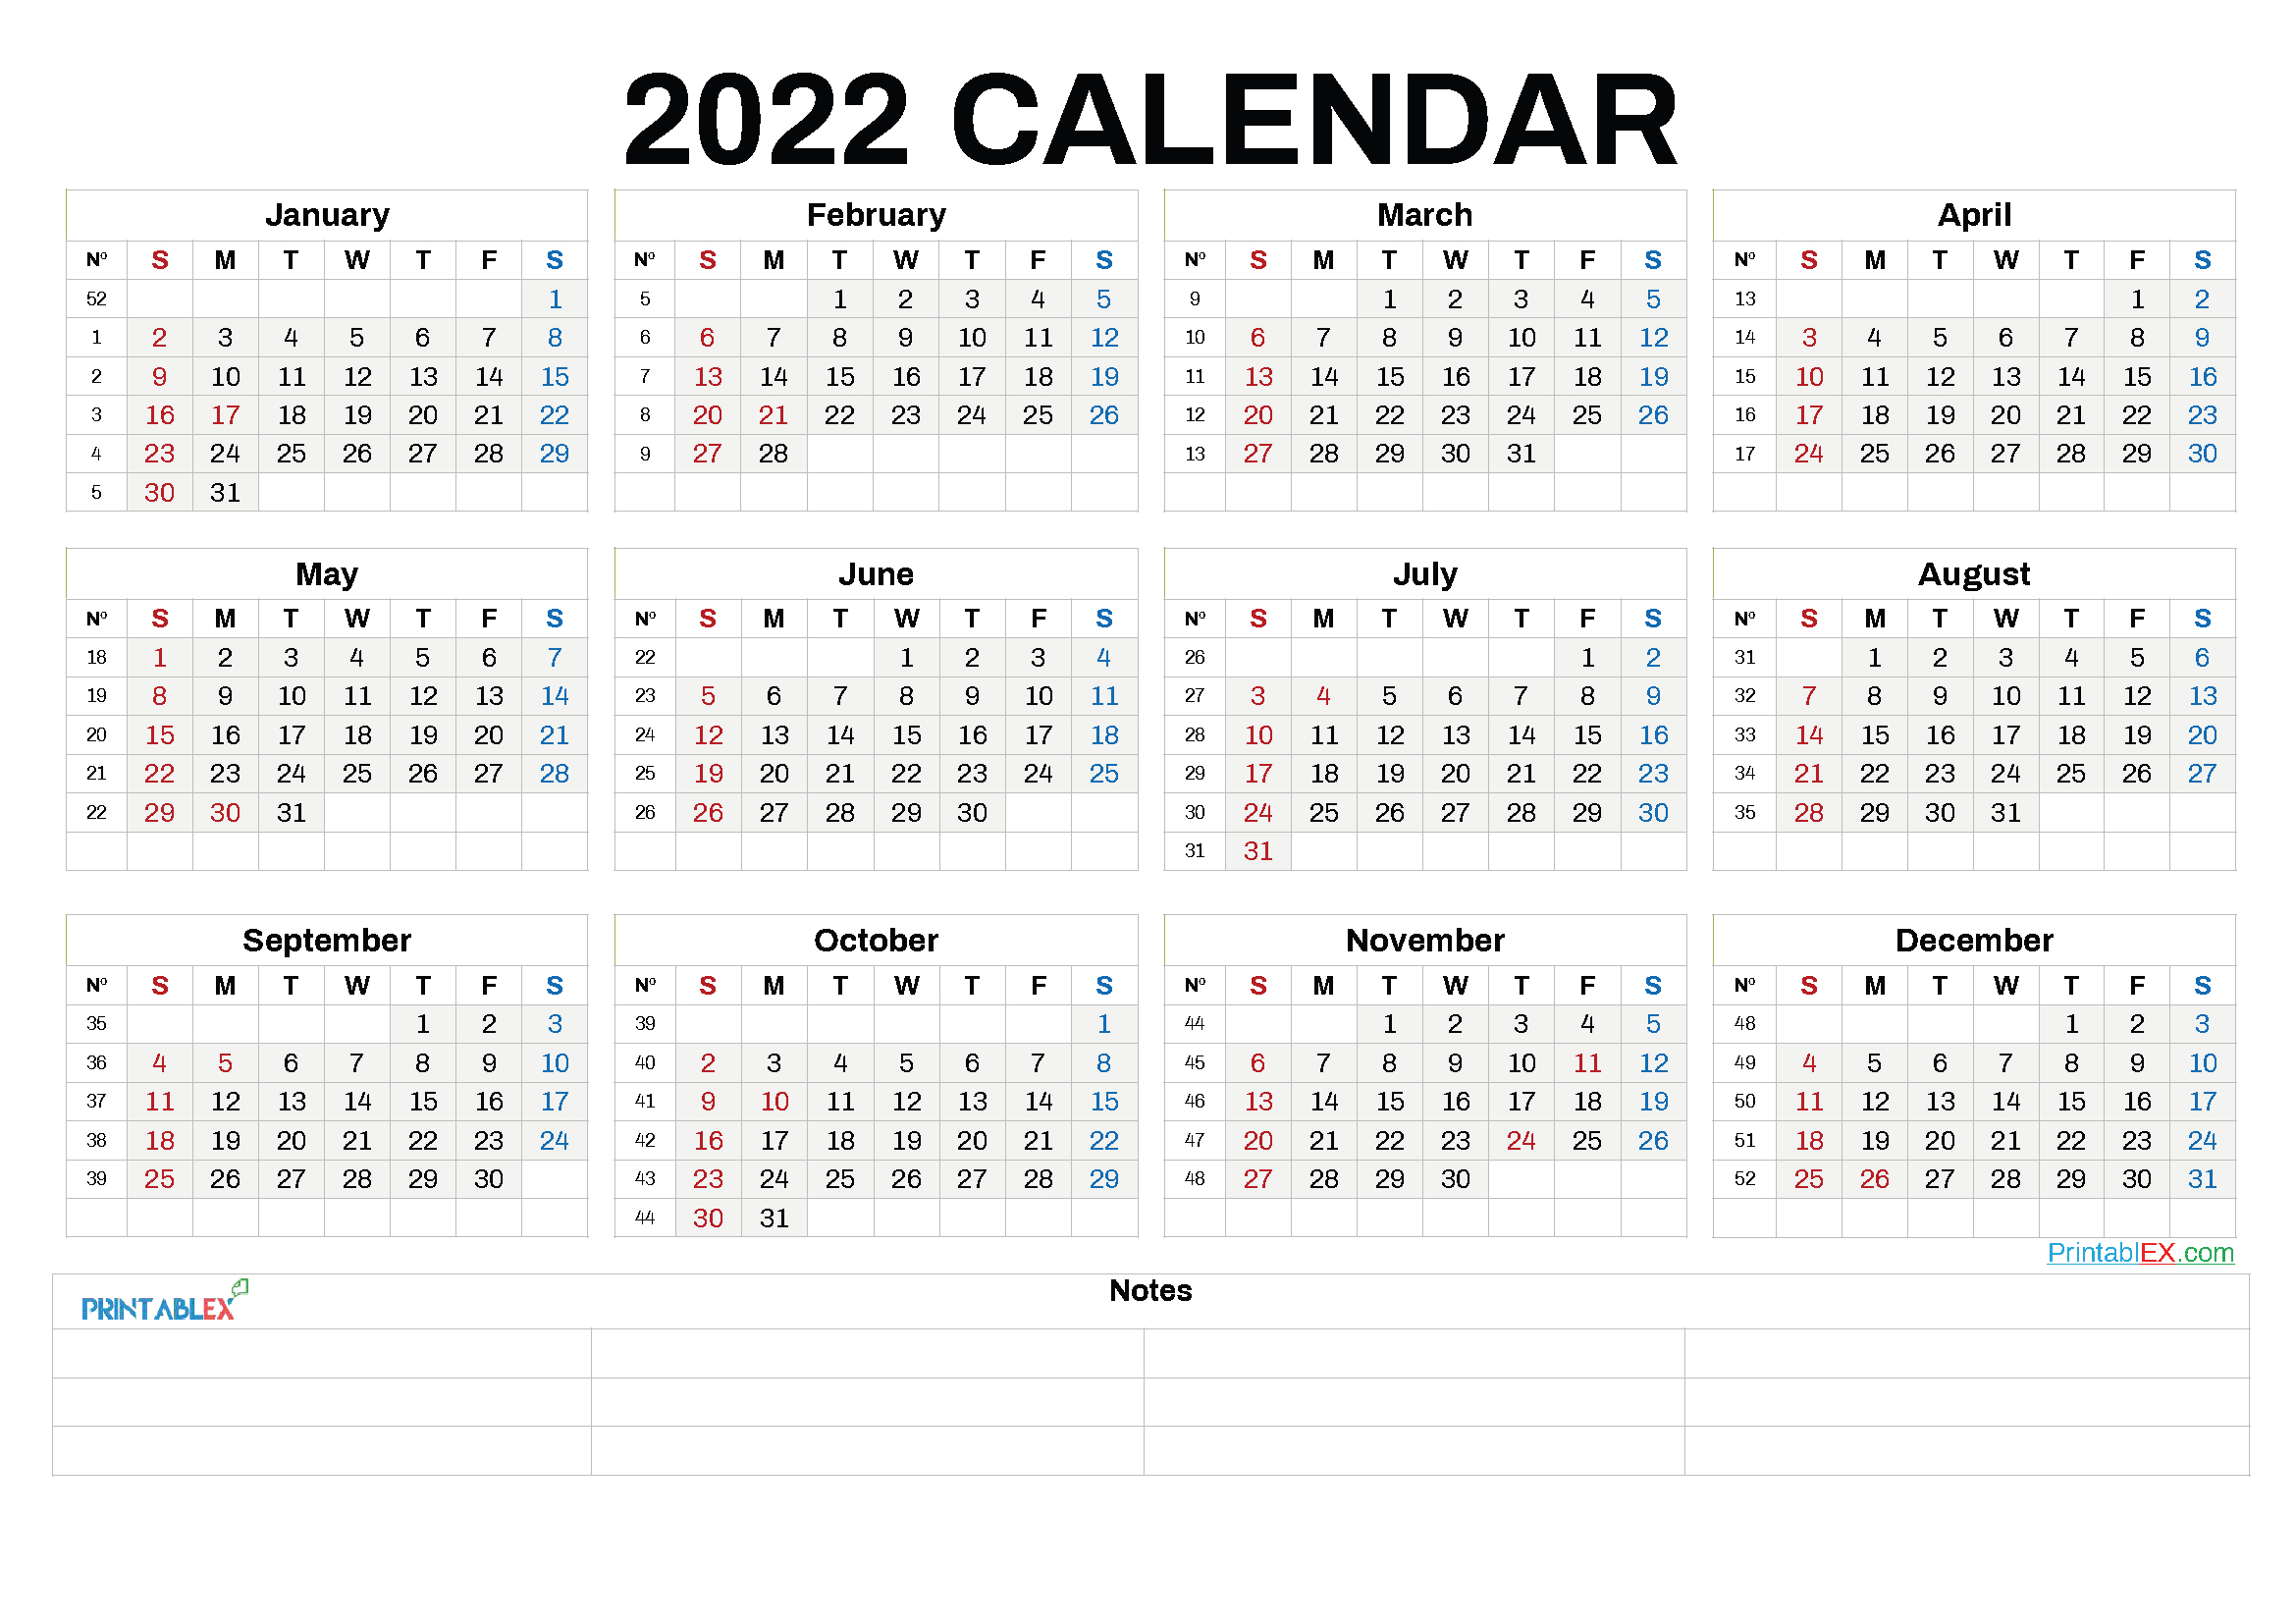 Printable 2022 Calendar By Year - 6 Templates - Free